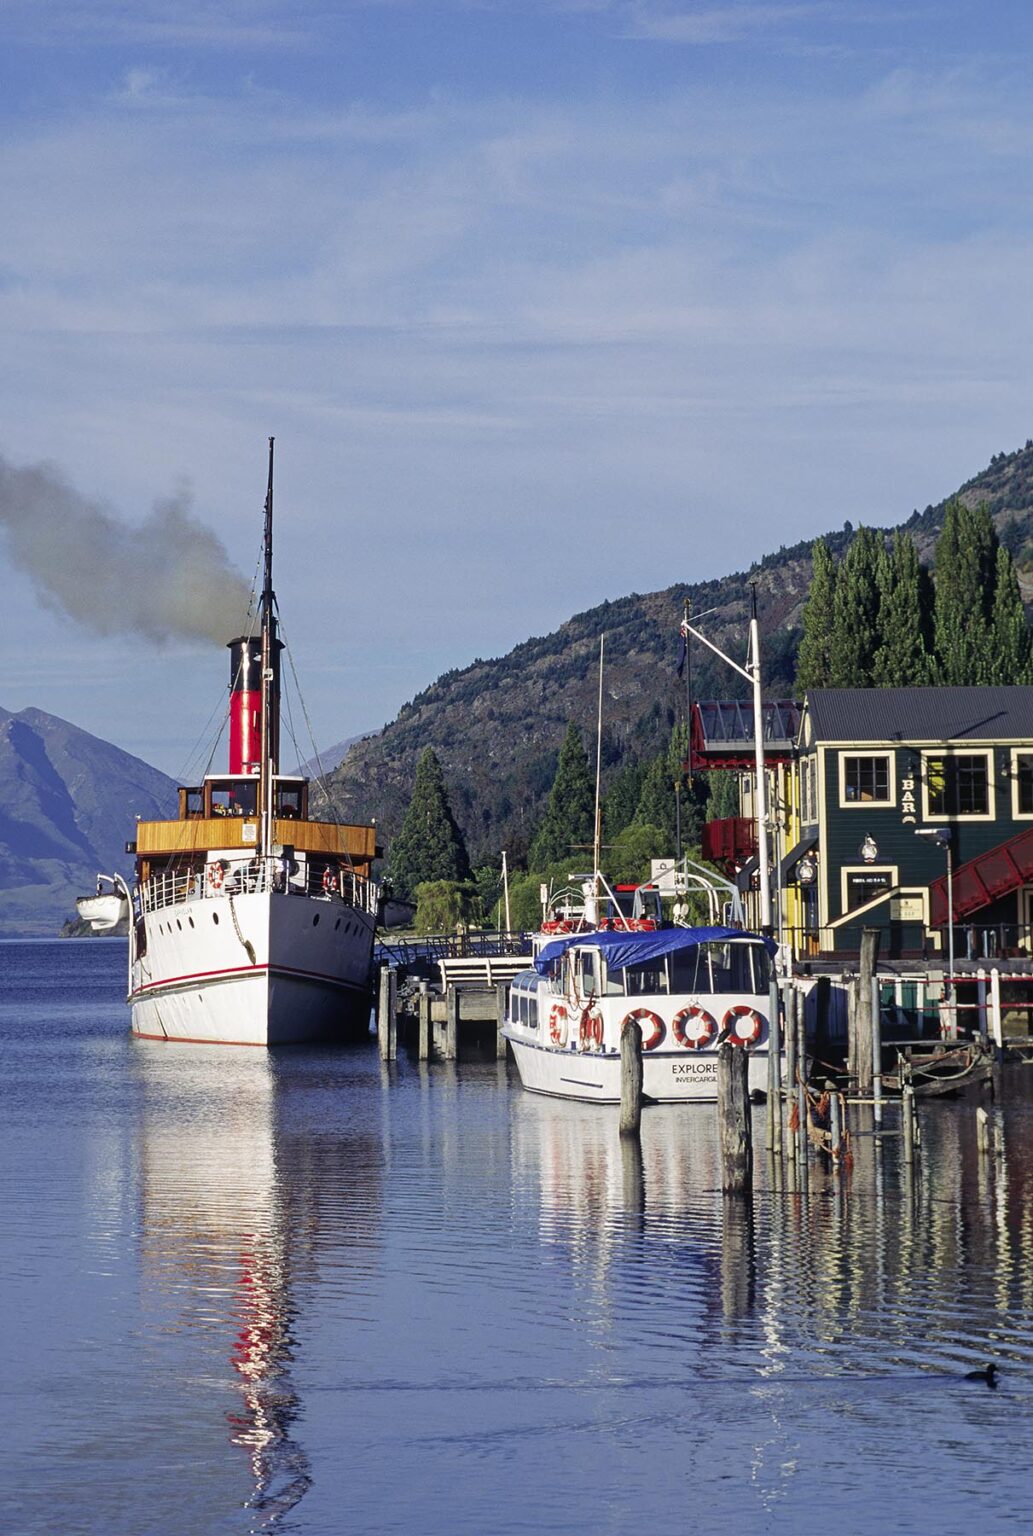 The STEAMSHIP EARNSLAW takes tourists on scenic cruises of LAKE WAKATIPU, and docks in QUEENSTOWN - SOUTH ISLAND, NEW ZEALAND